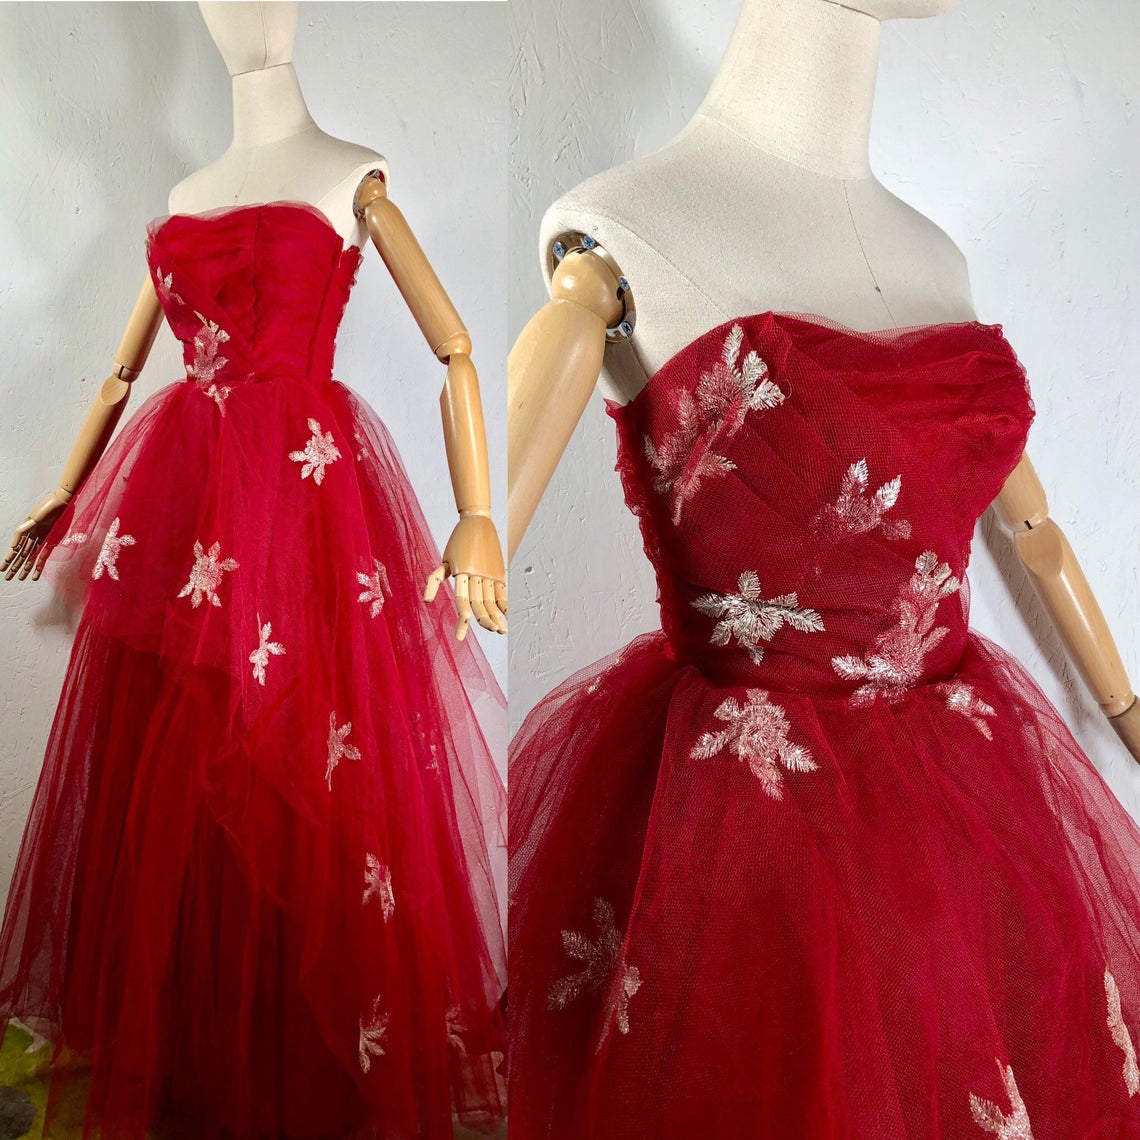 Vintage 50s Prom Dress / 1950s Red Tulle Ball Gown Evening Dress / Strapless Long Formal / Silver Metallic,pl2716